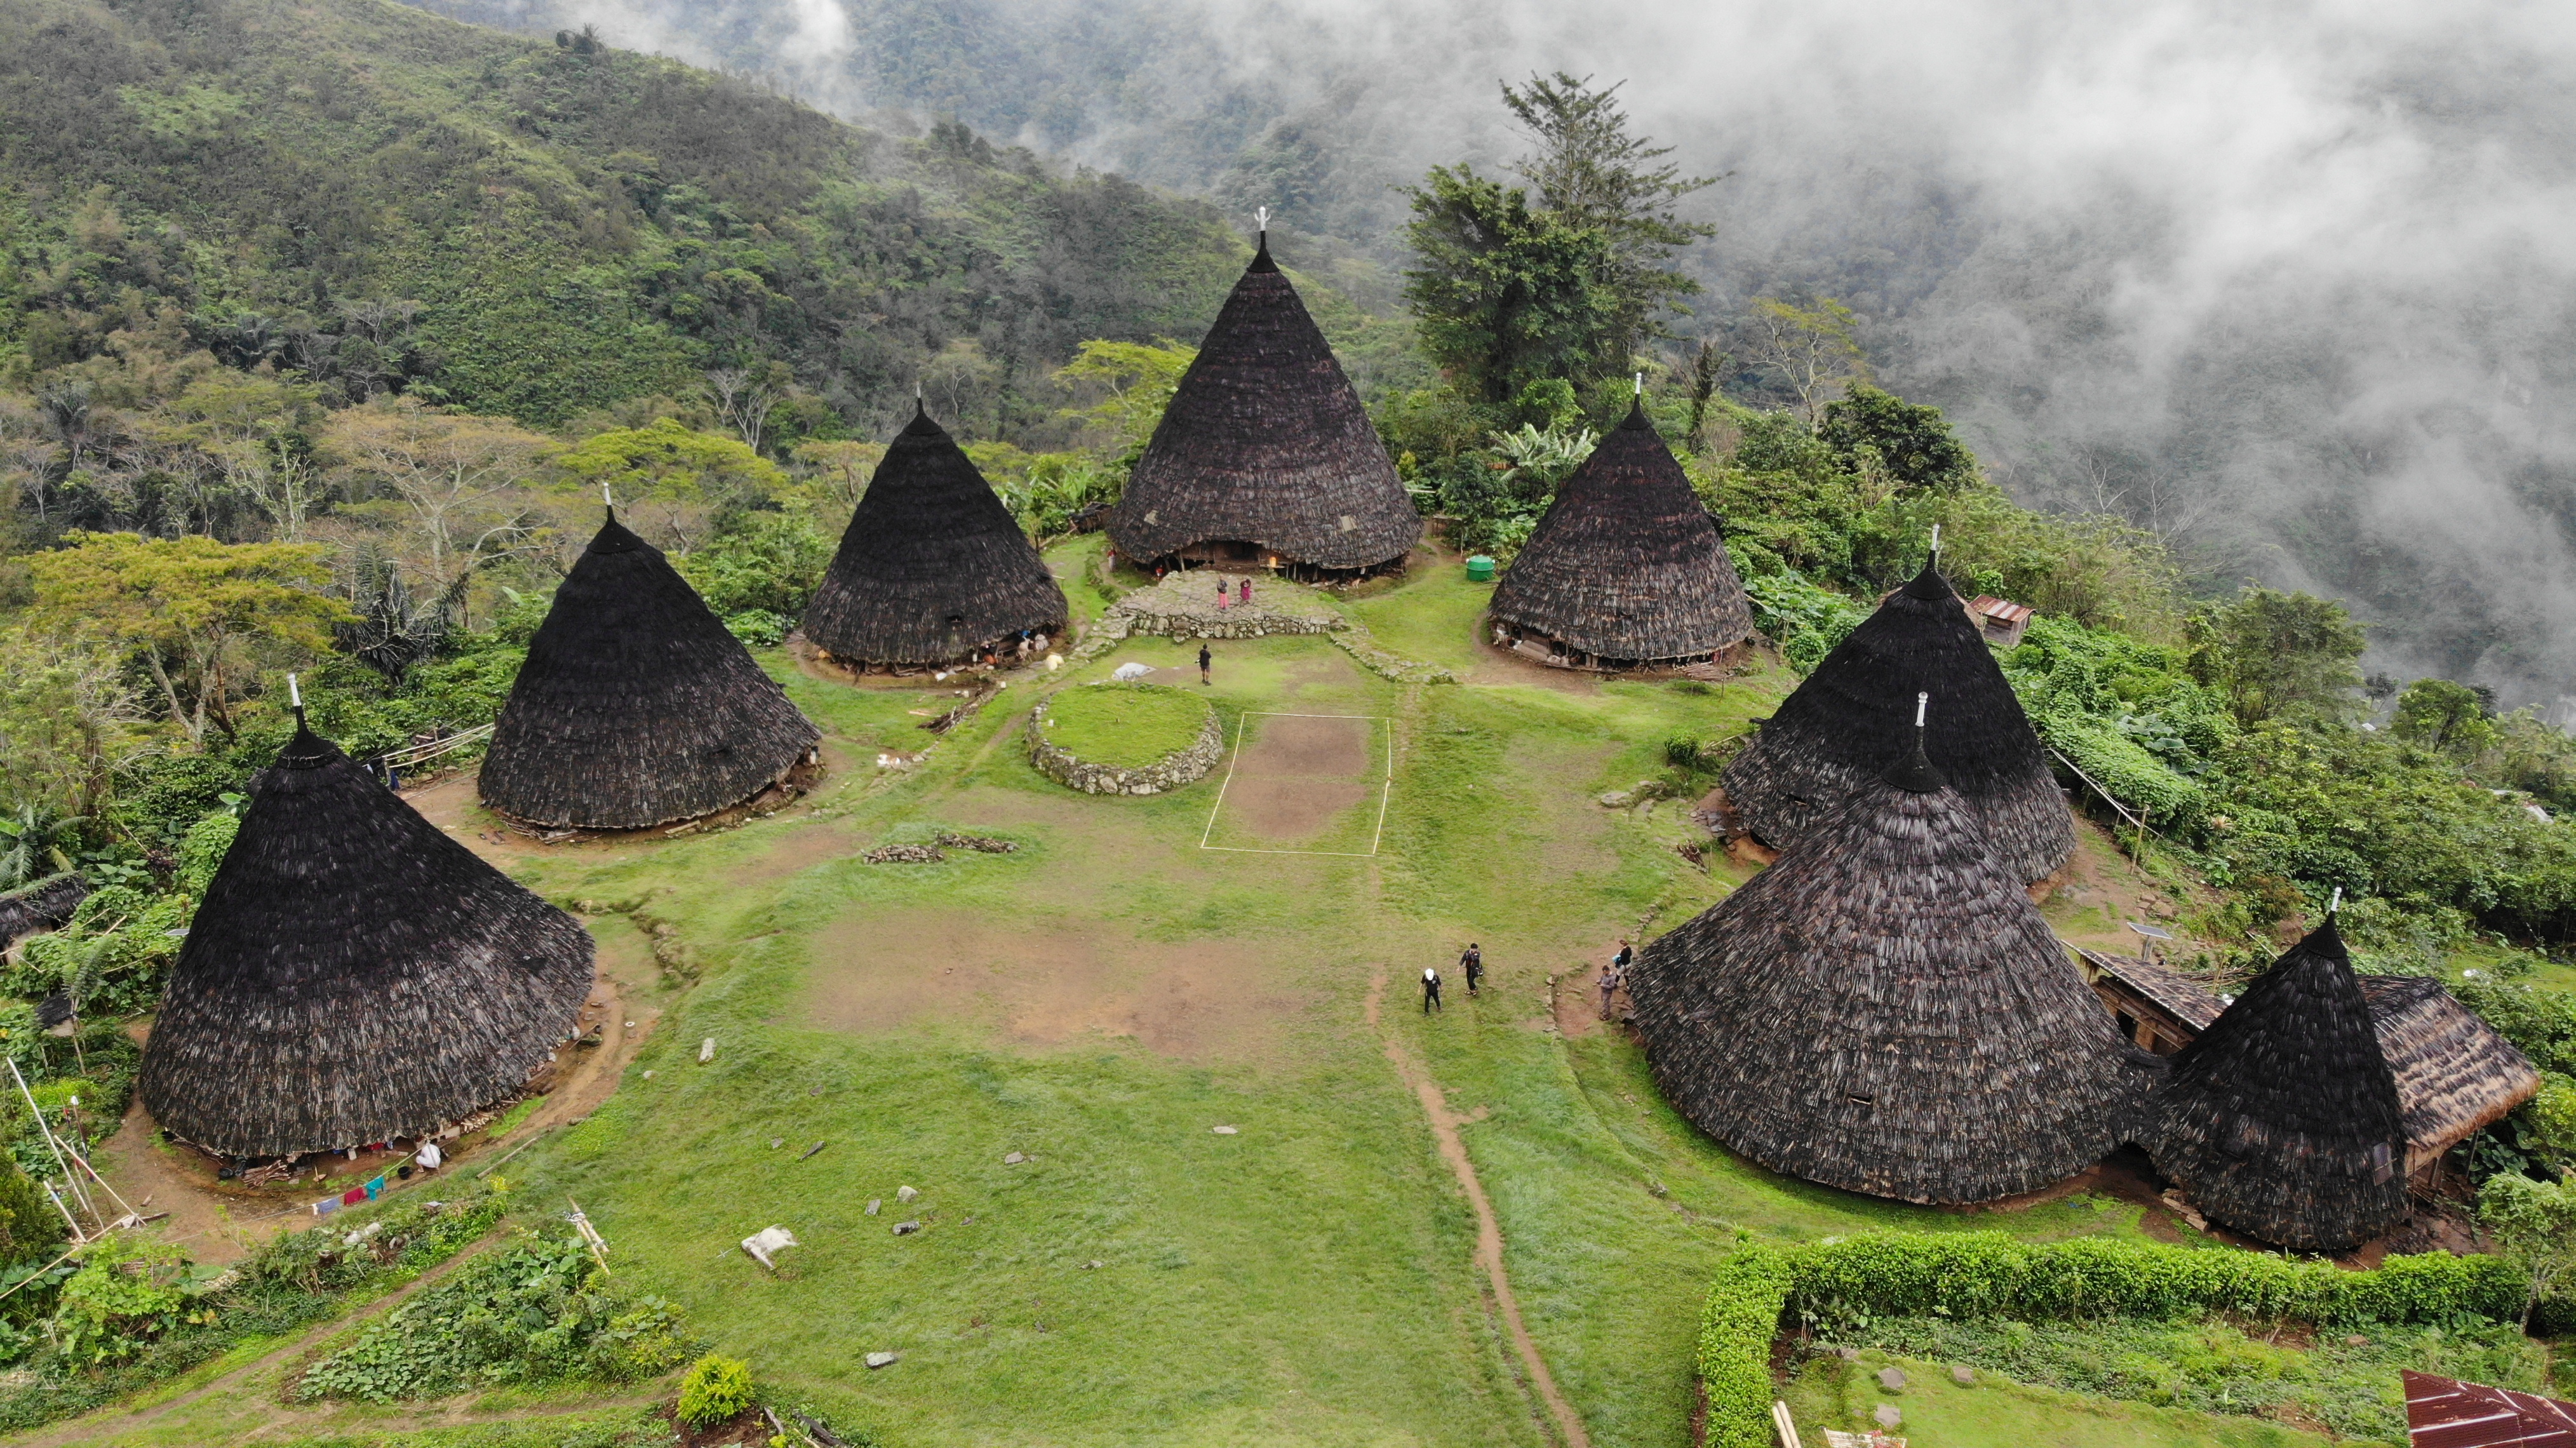 Wae Rebo, The Most Beautiful Village In The World